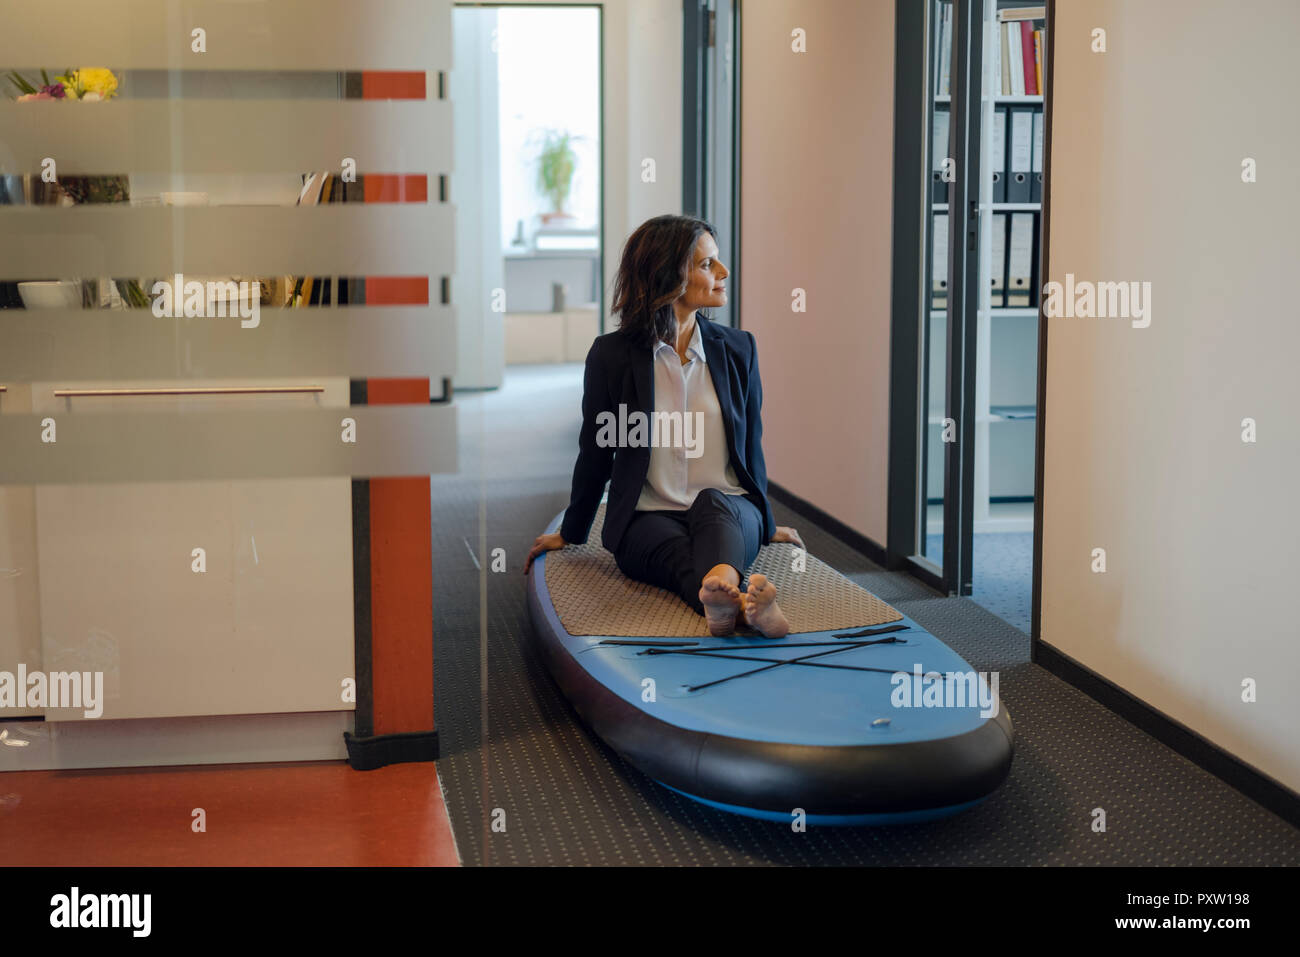 Businesswoman sitting on paddle board, daydreaming in office Banque D'Images